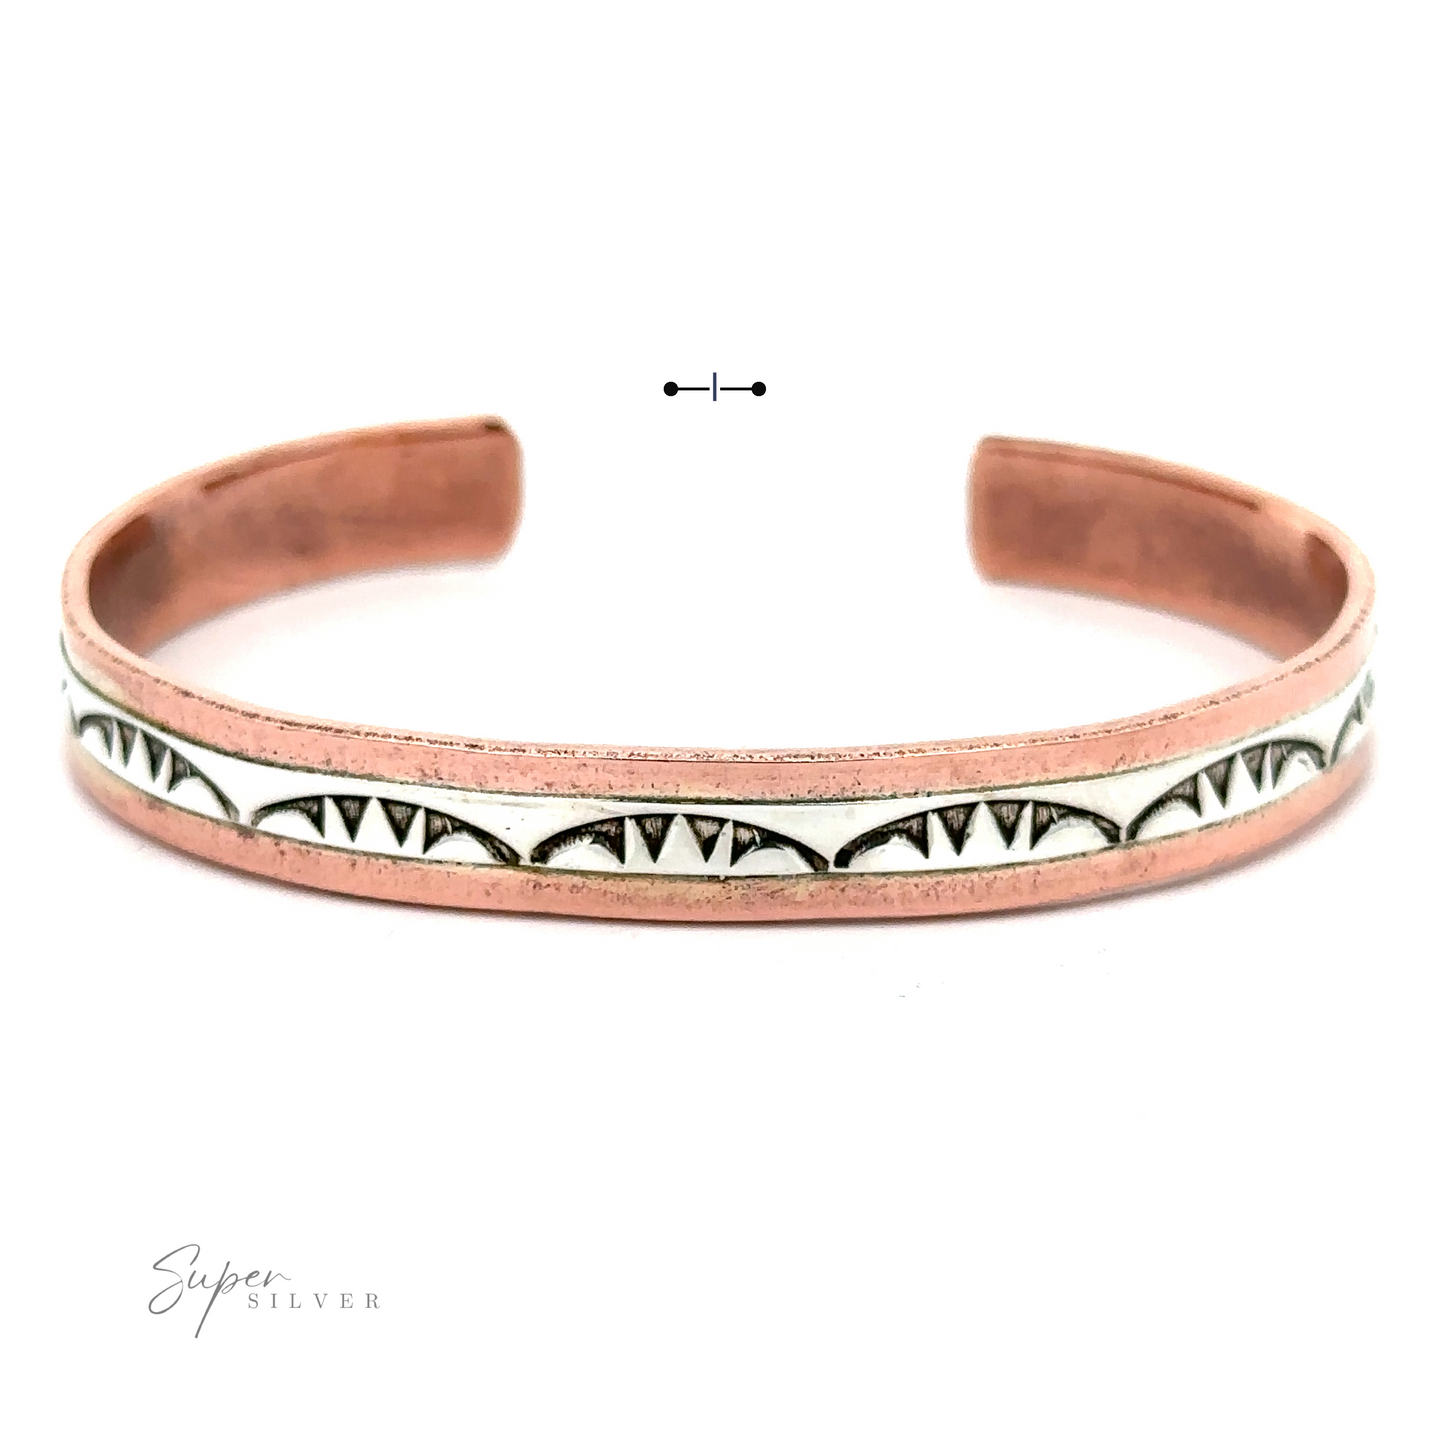 
                  
                    A Native American Handmade Copper And Silver Bracelet with an engraved pattern featuring triangular designs and a contrasting white inlay, inspired by Native American handcrafted artistry.
                  
                